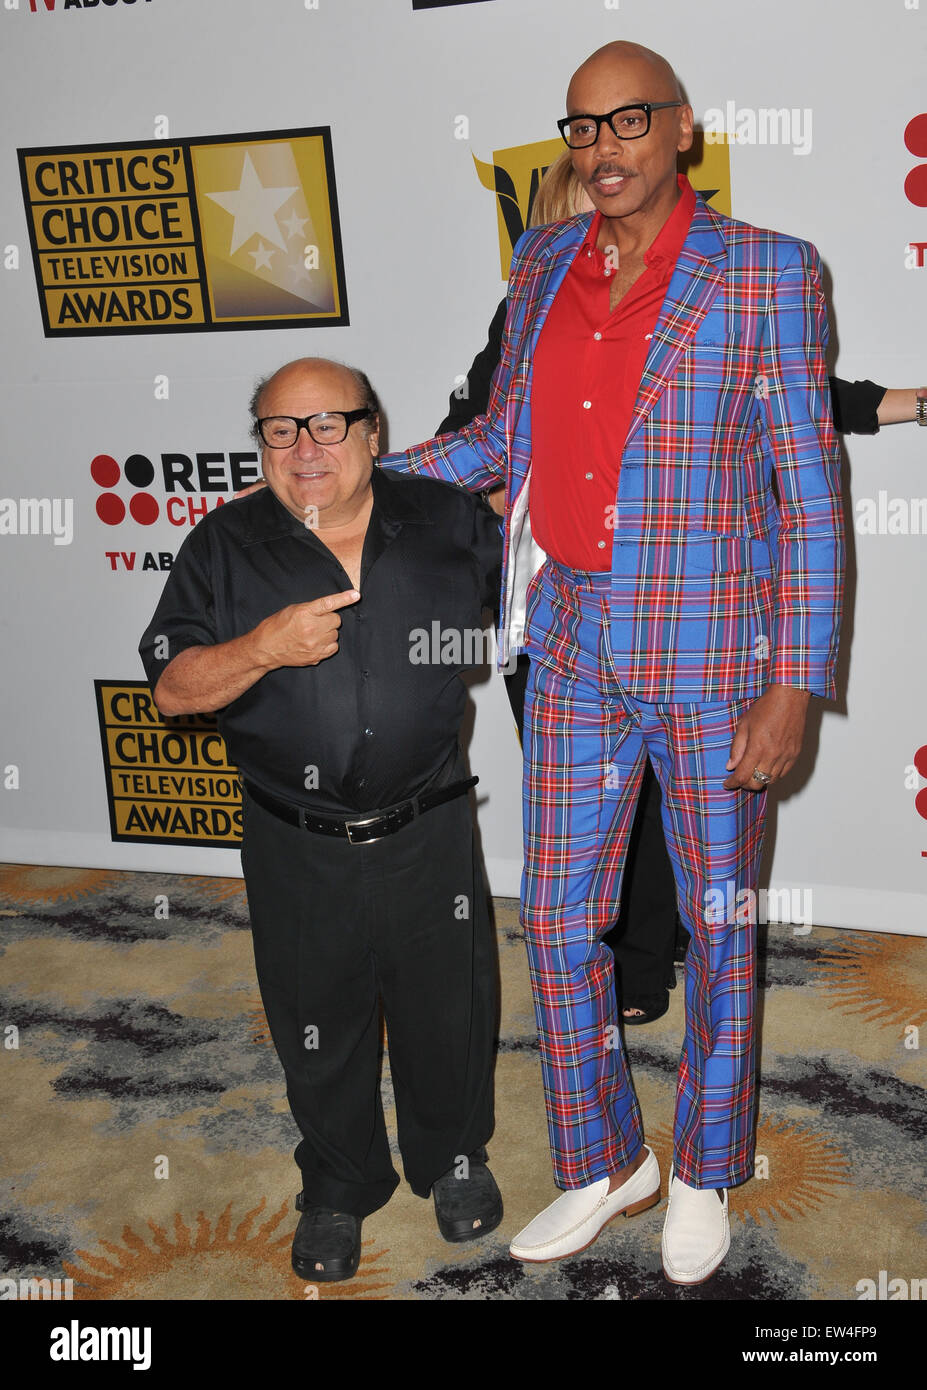 BEVERLY HILLS, CA - JUNE 20, 2011: Danny DeVito & RuPaul (right) at the 2011 Critics' Choice Television Awards at the Beverly Hills Hotel. Stock Photo